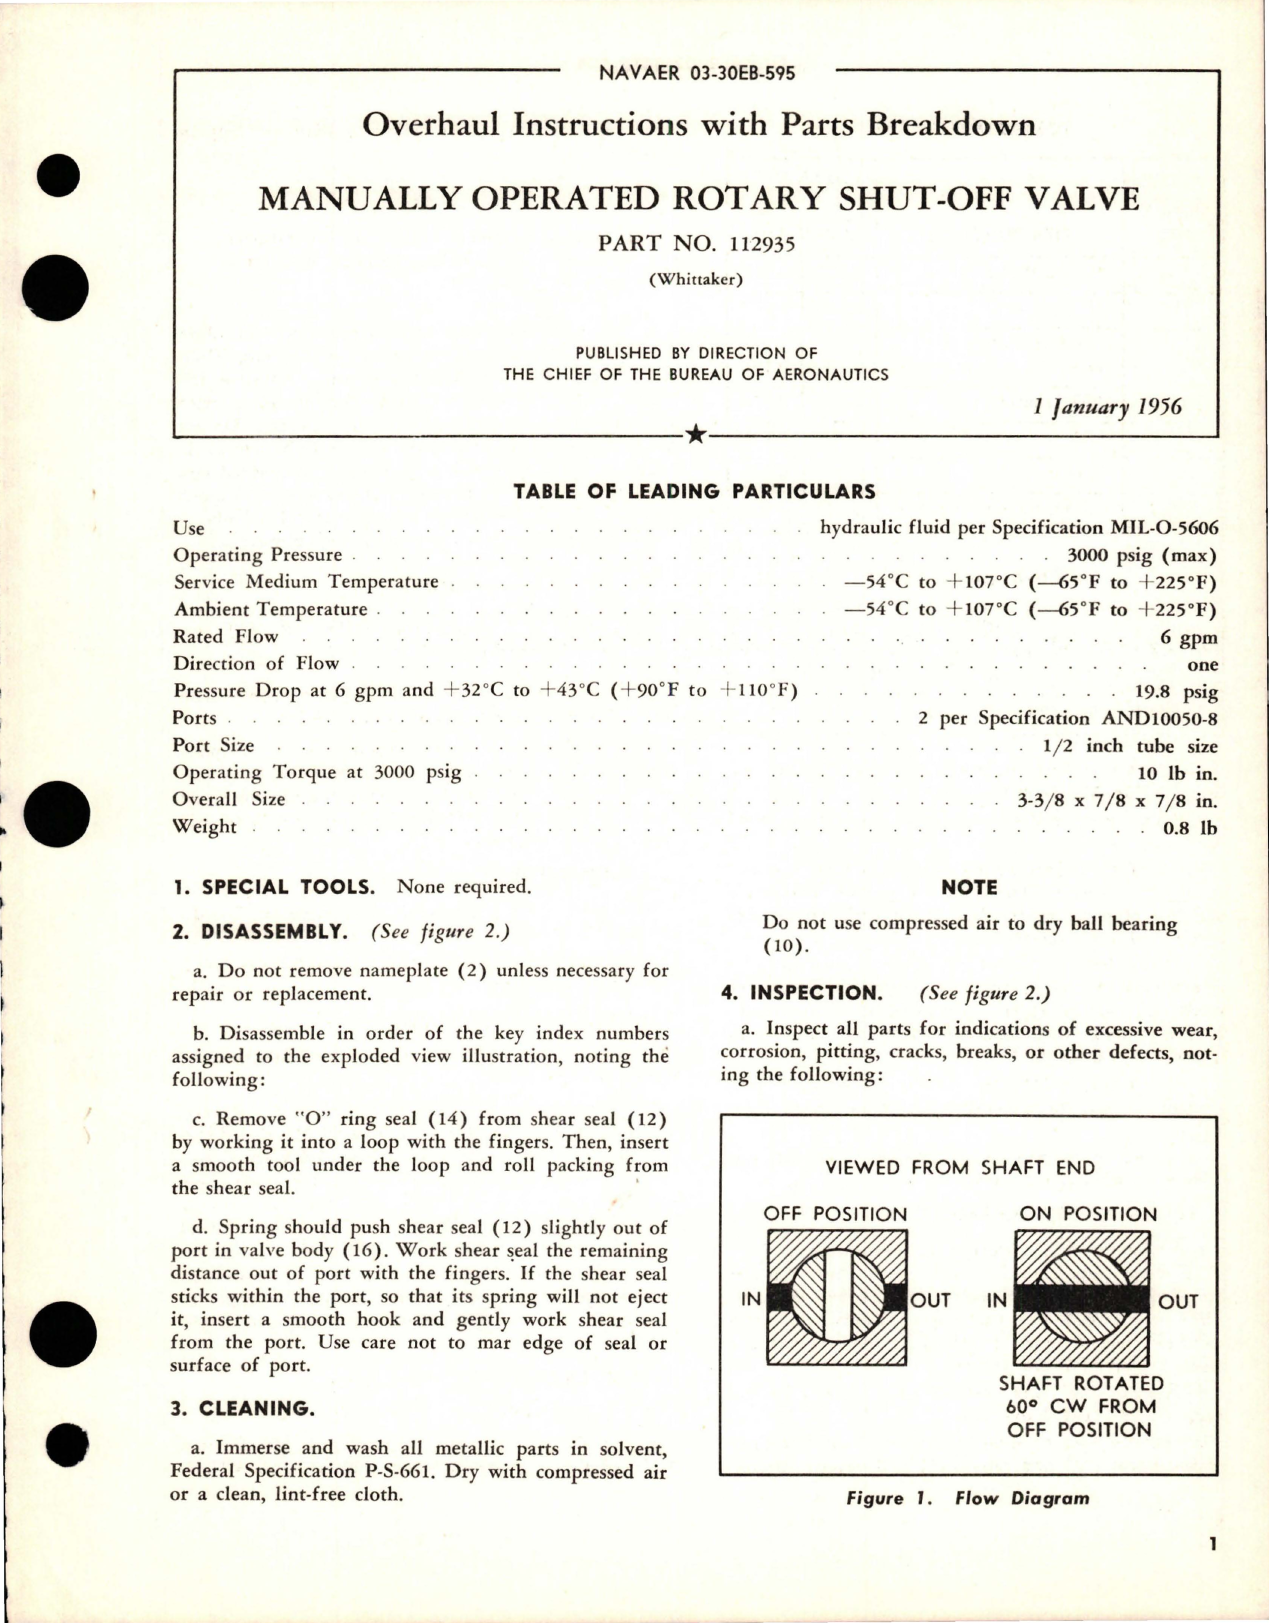 Sample page 1 from AirCorps Library document: Overhaul Instructions with Parts for Manually Operated Rotary Shut Off Valve - Part 112935